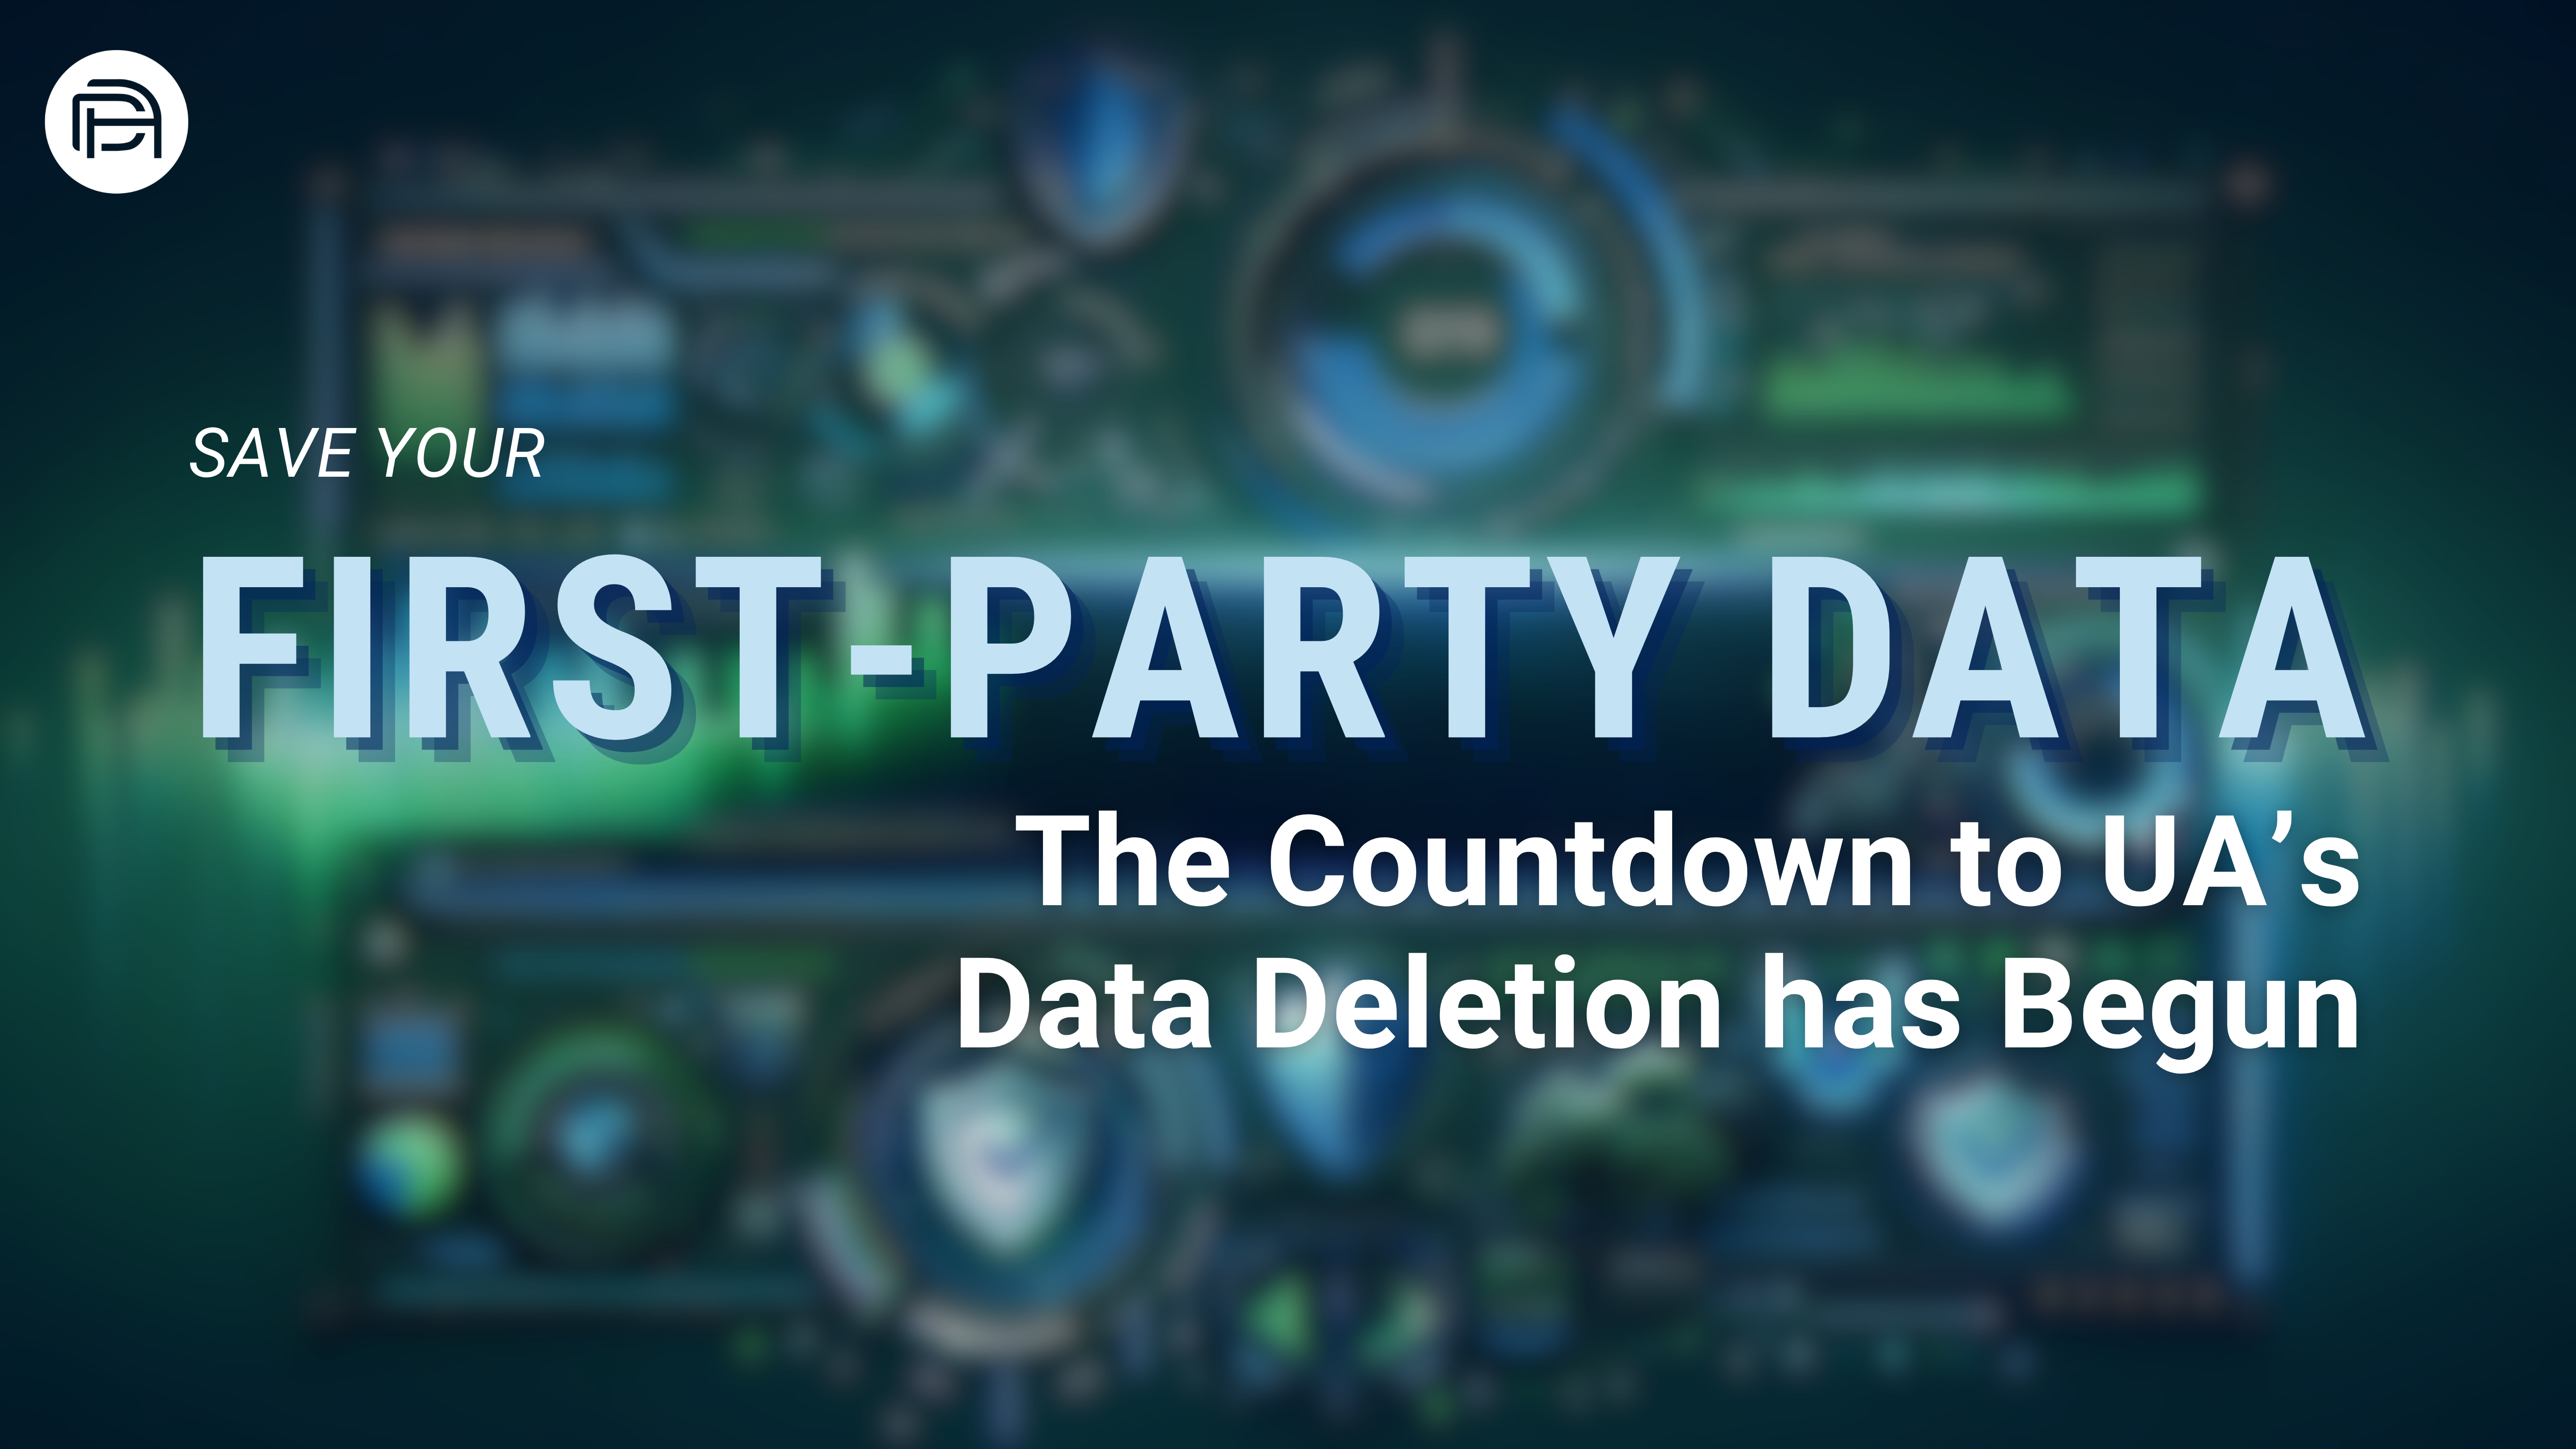 Save Your First-Party Data: The Countdown to UA’s Data Deletion has Begun